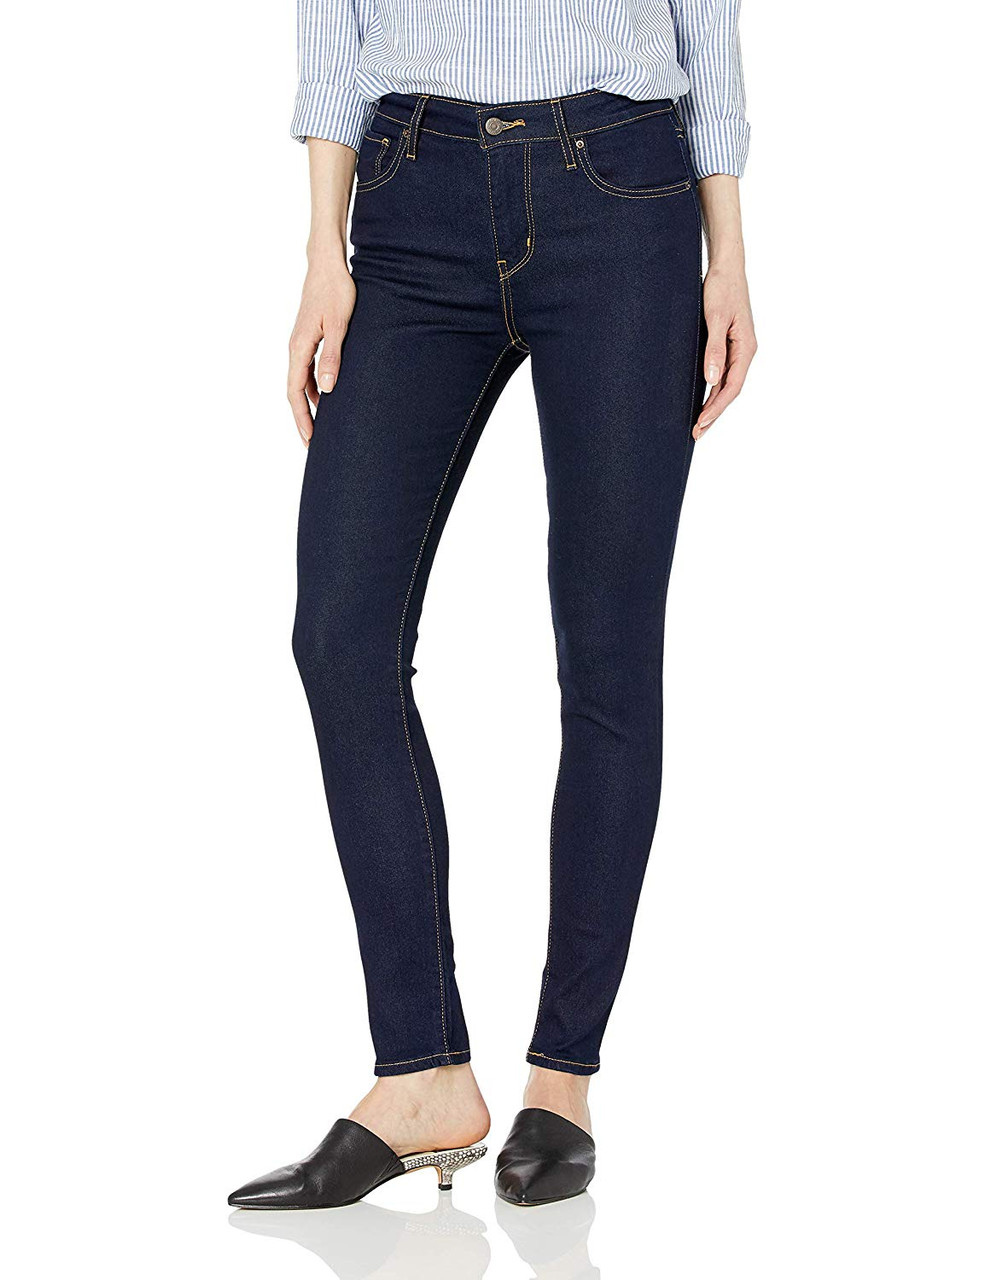 Levi's Women 721 High Rise Skinny Cast Shadows 18882-0023 - RETAIL GROUPE